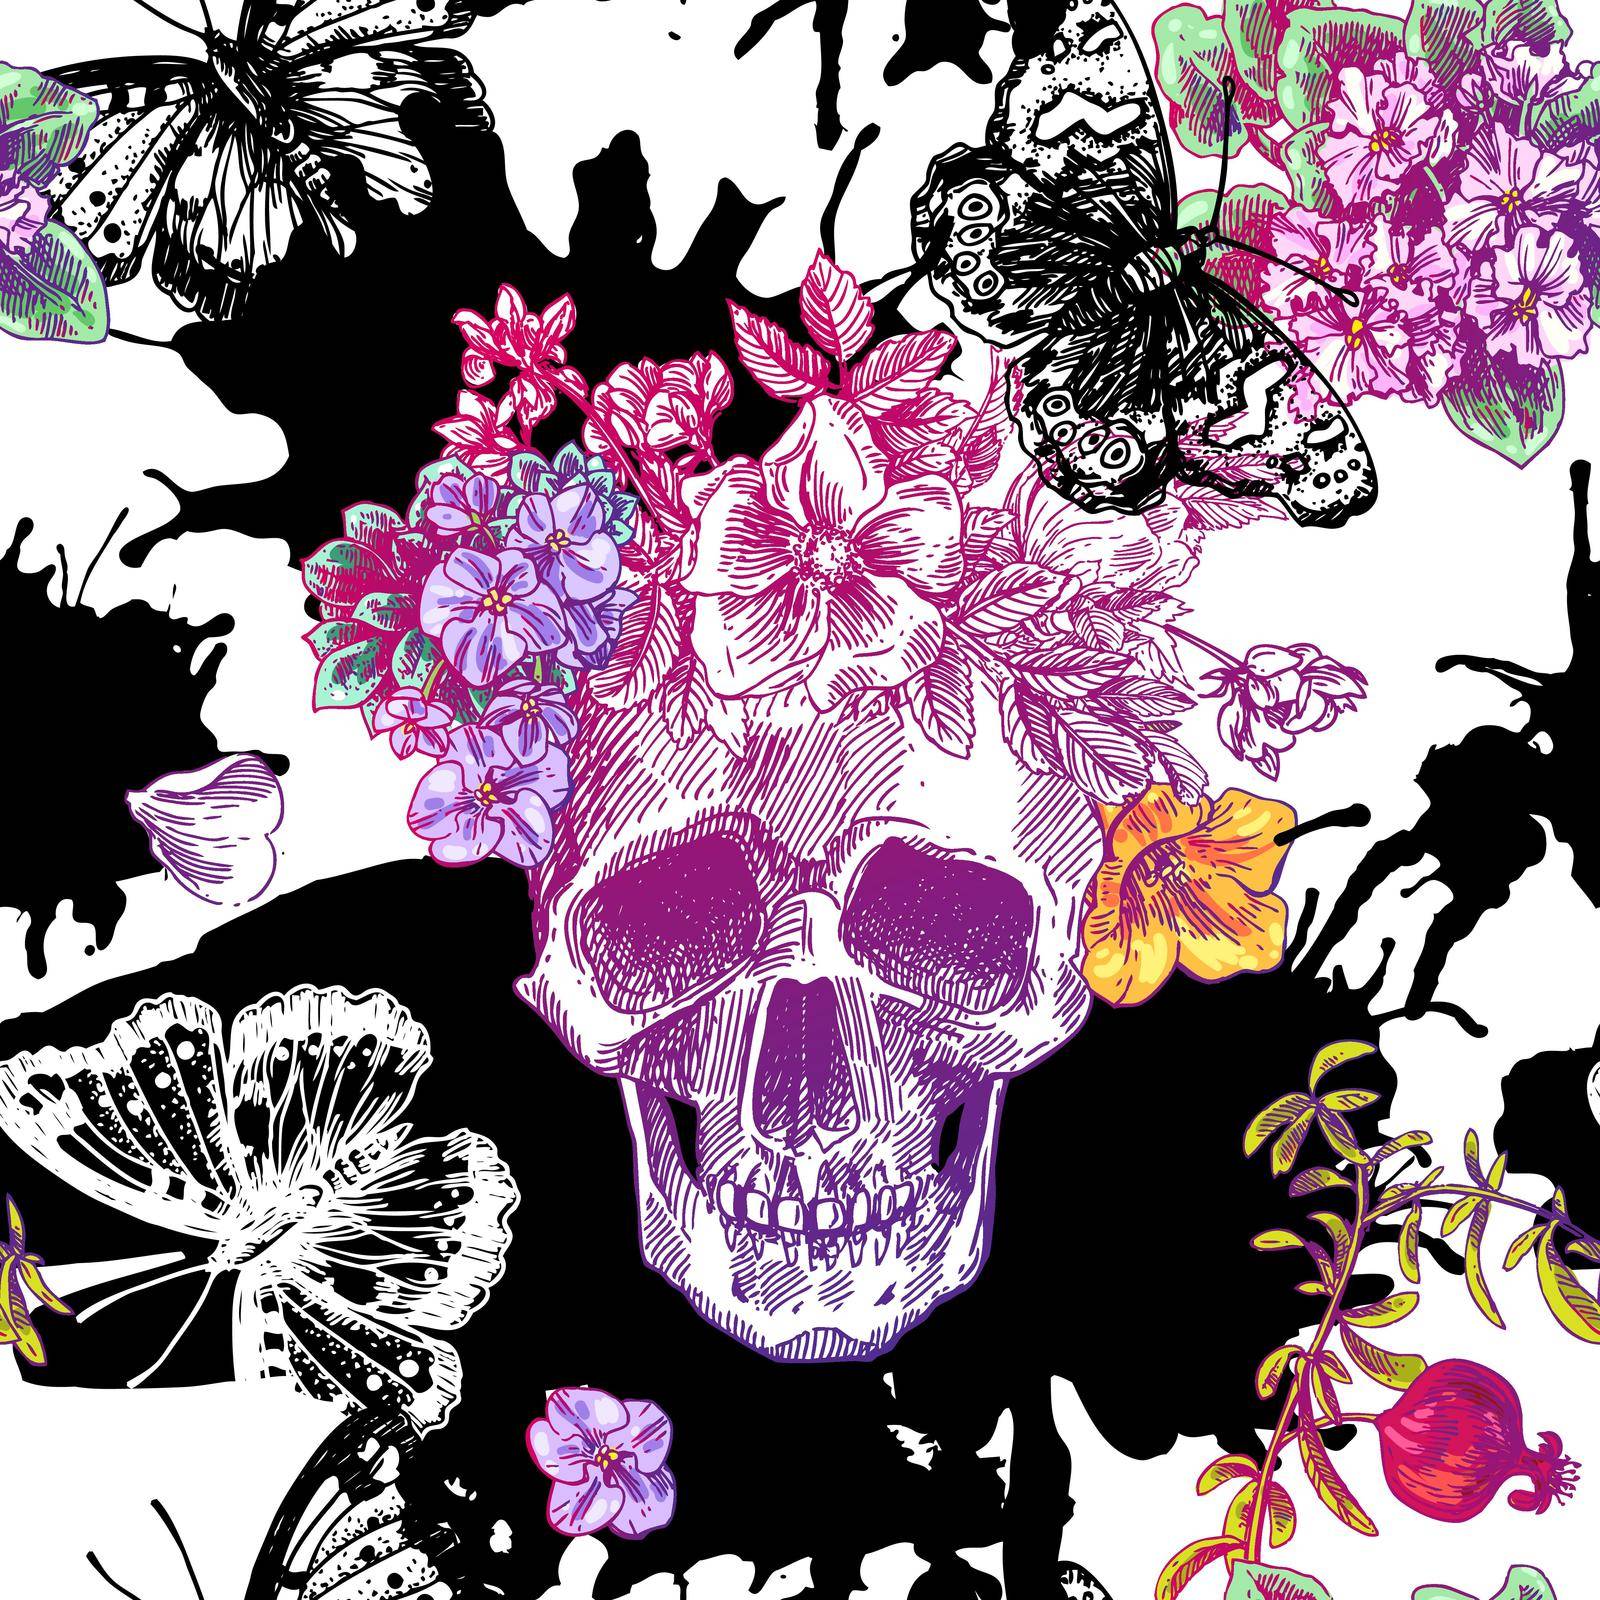 Beautiful hand drawn sketch illustration seamless pattern the skull and flowers. Boho style print for textile.